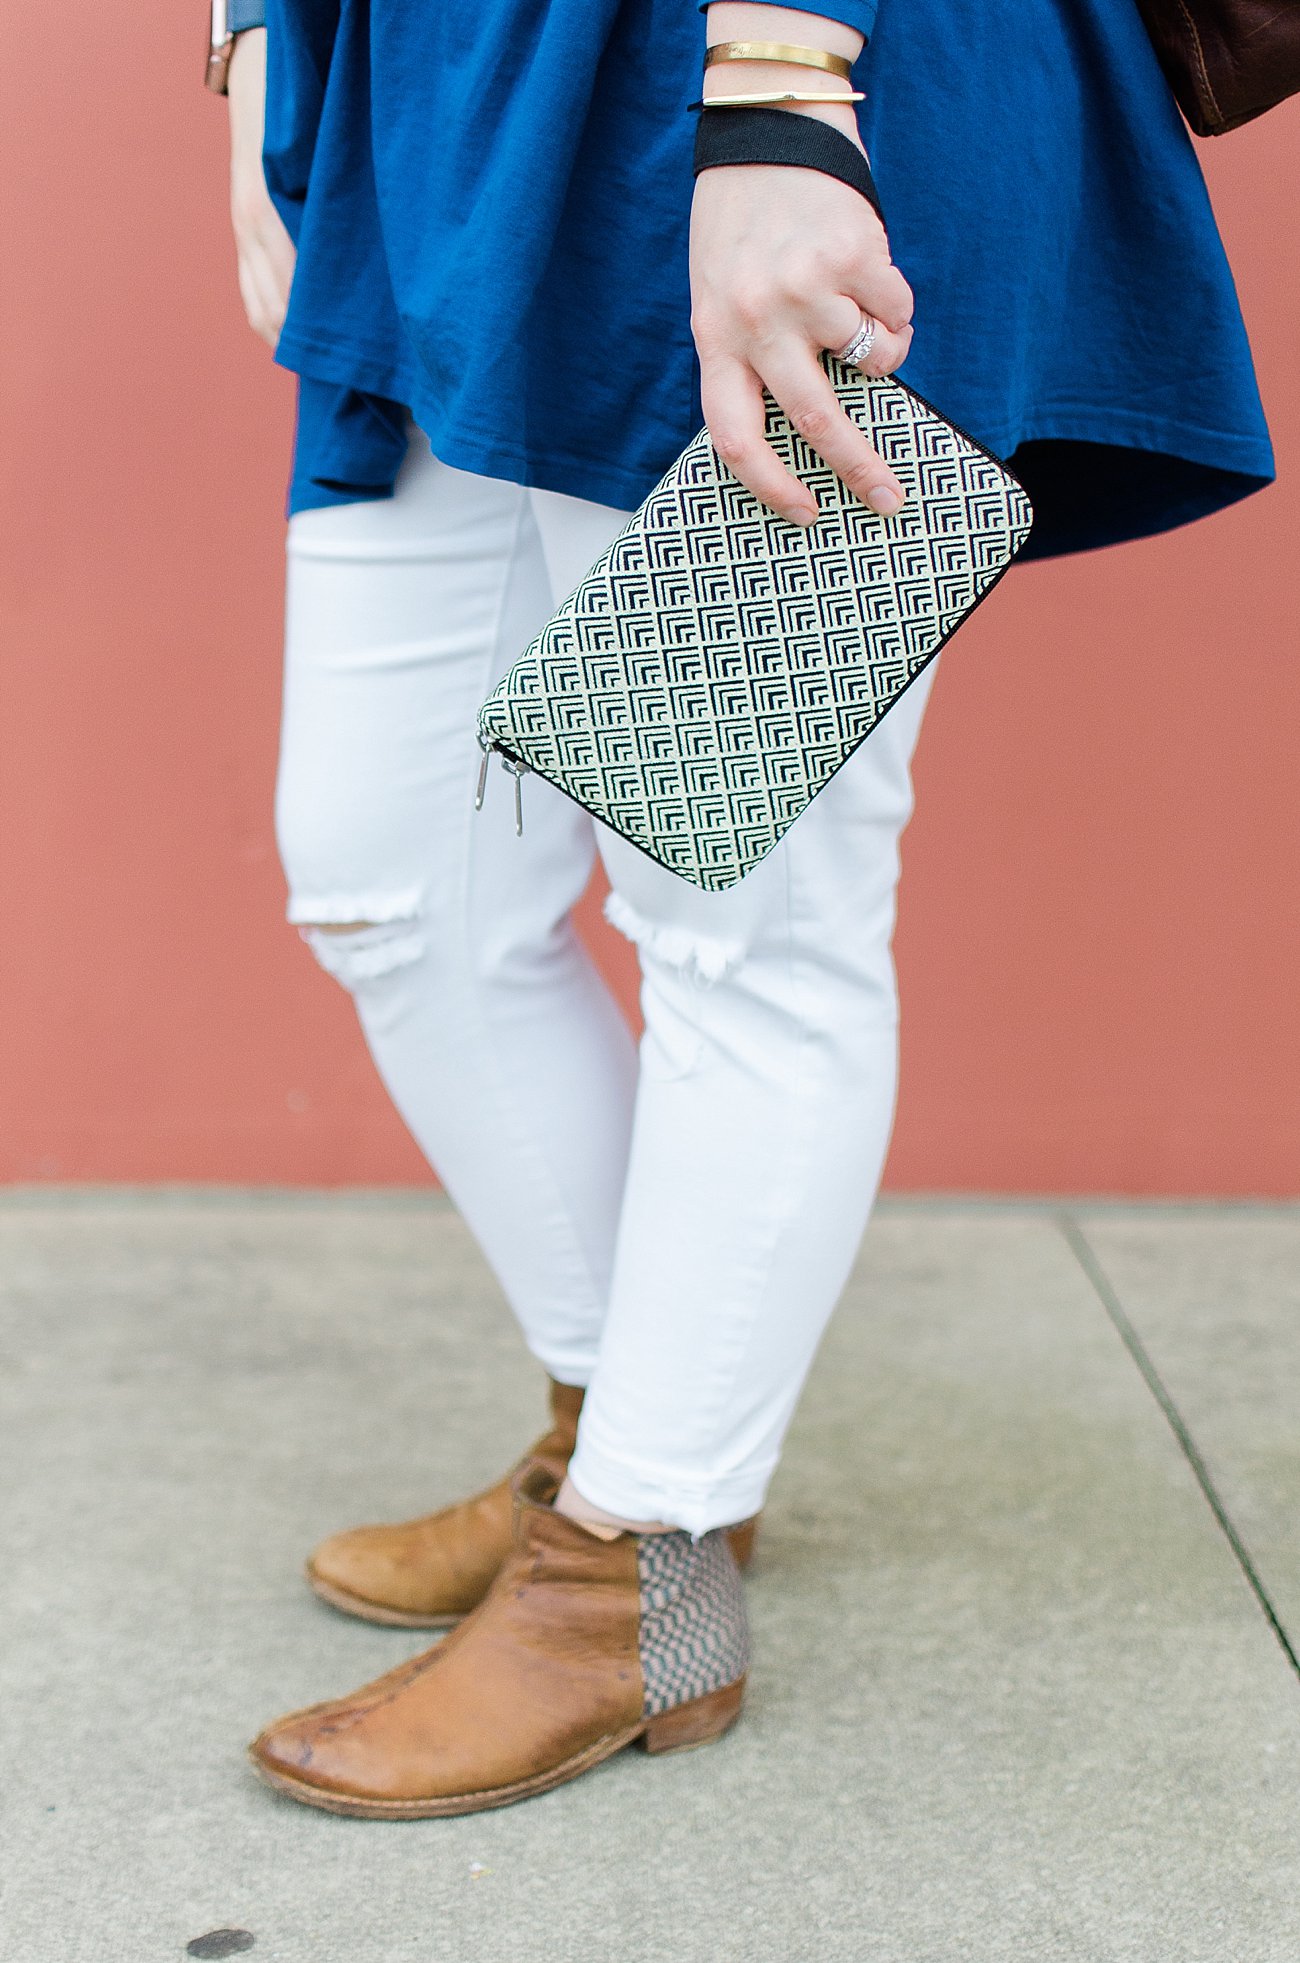 Ethical fashion blogger - Elegantees tunic, The Root Collective Espe booties, Matr Boomie Druzy Drop Necklace, JOYN bag, Malia Designs wallet - Fair Trade Fashion (4) - The Recent Lessons Learned by popular North Carolina ethical fashion blogger Still Being Molly